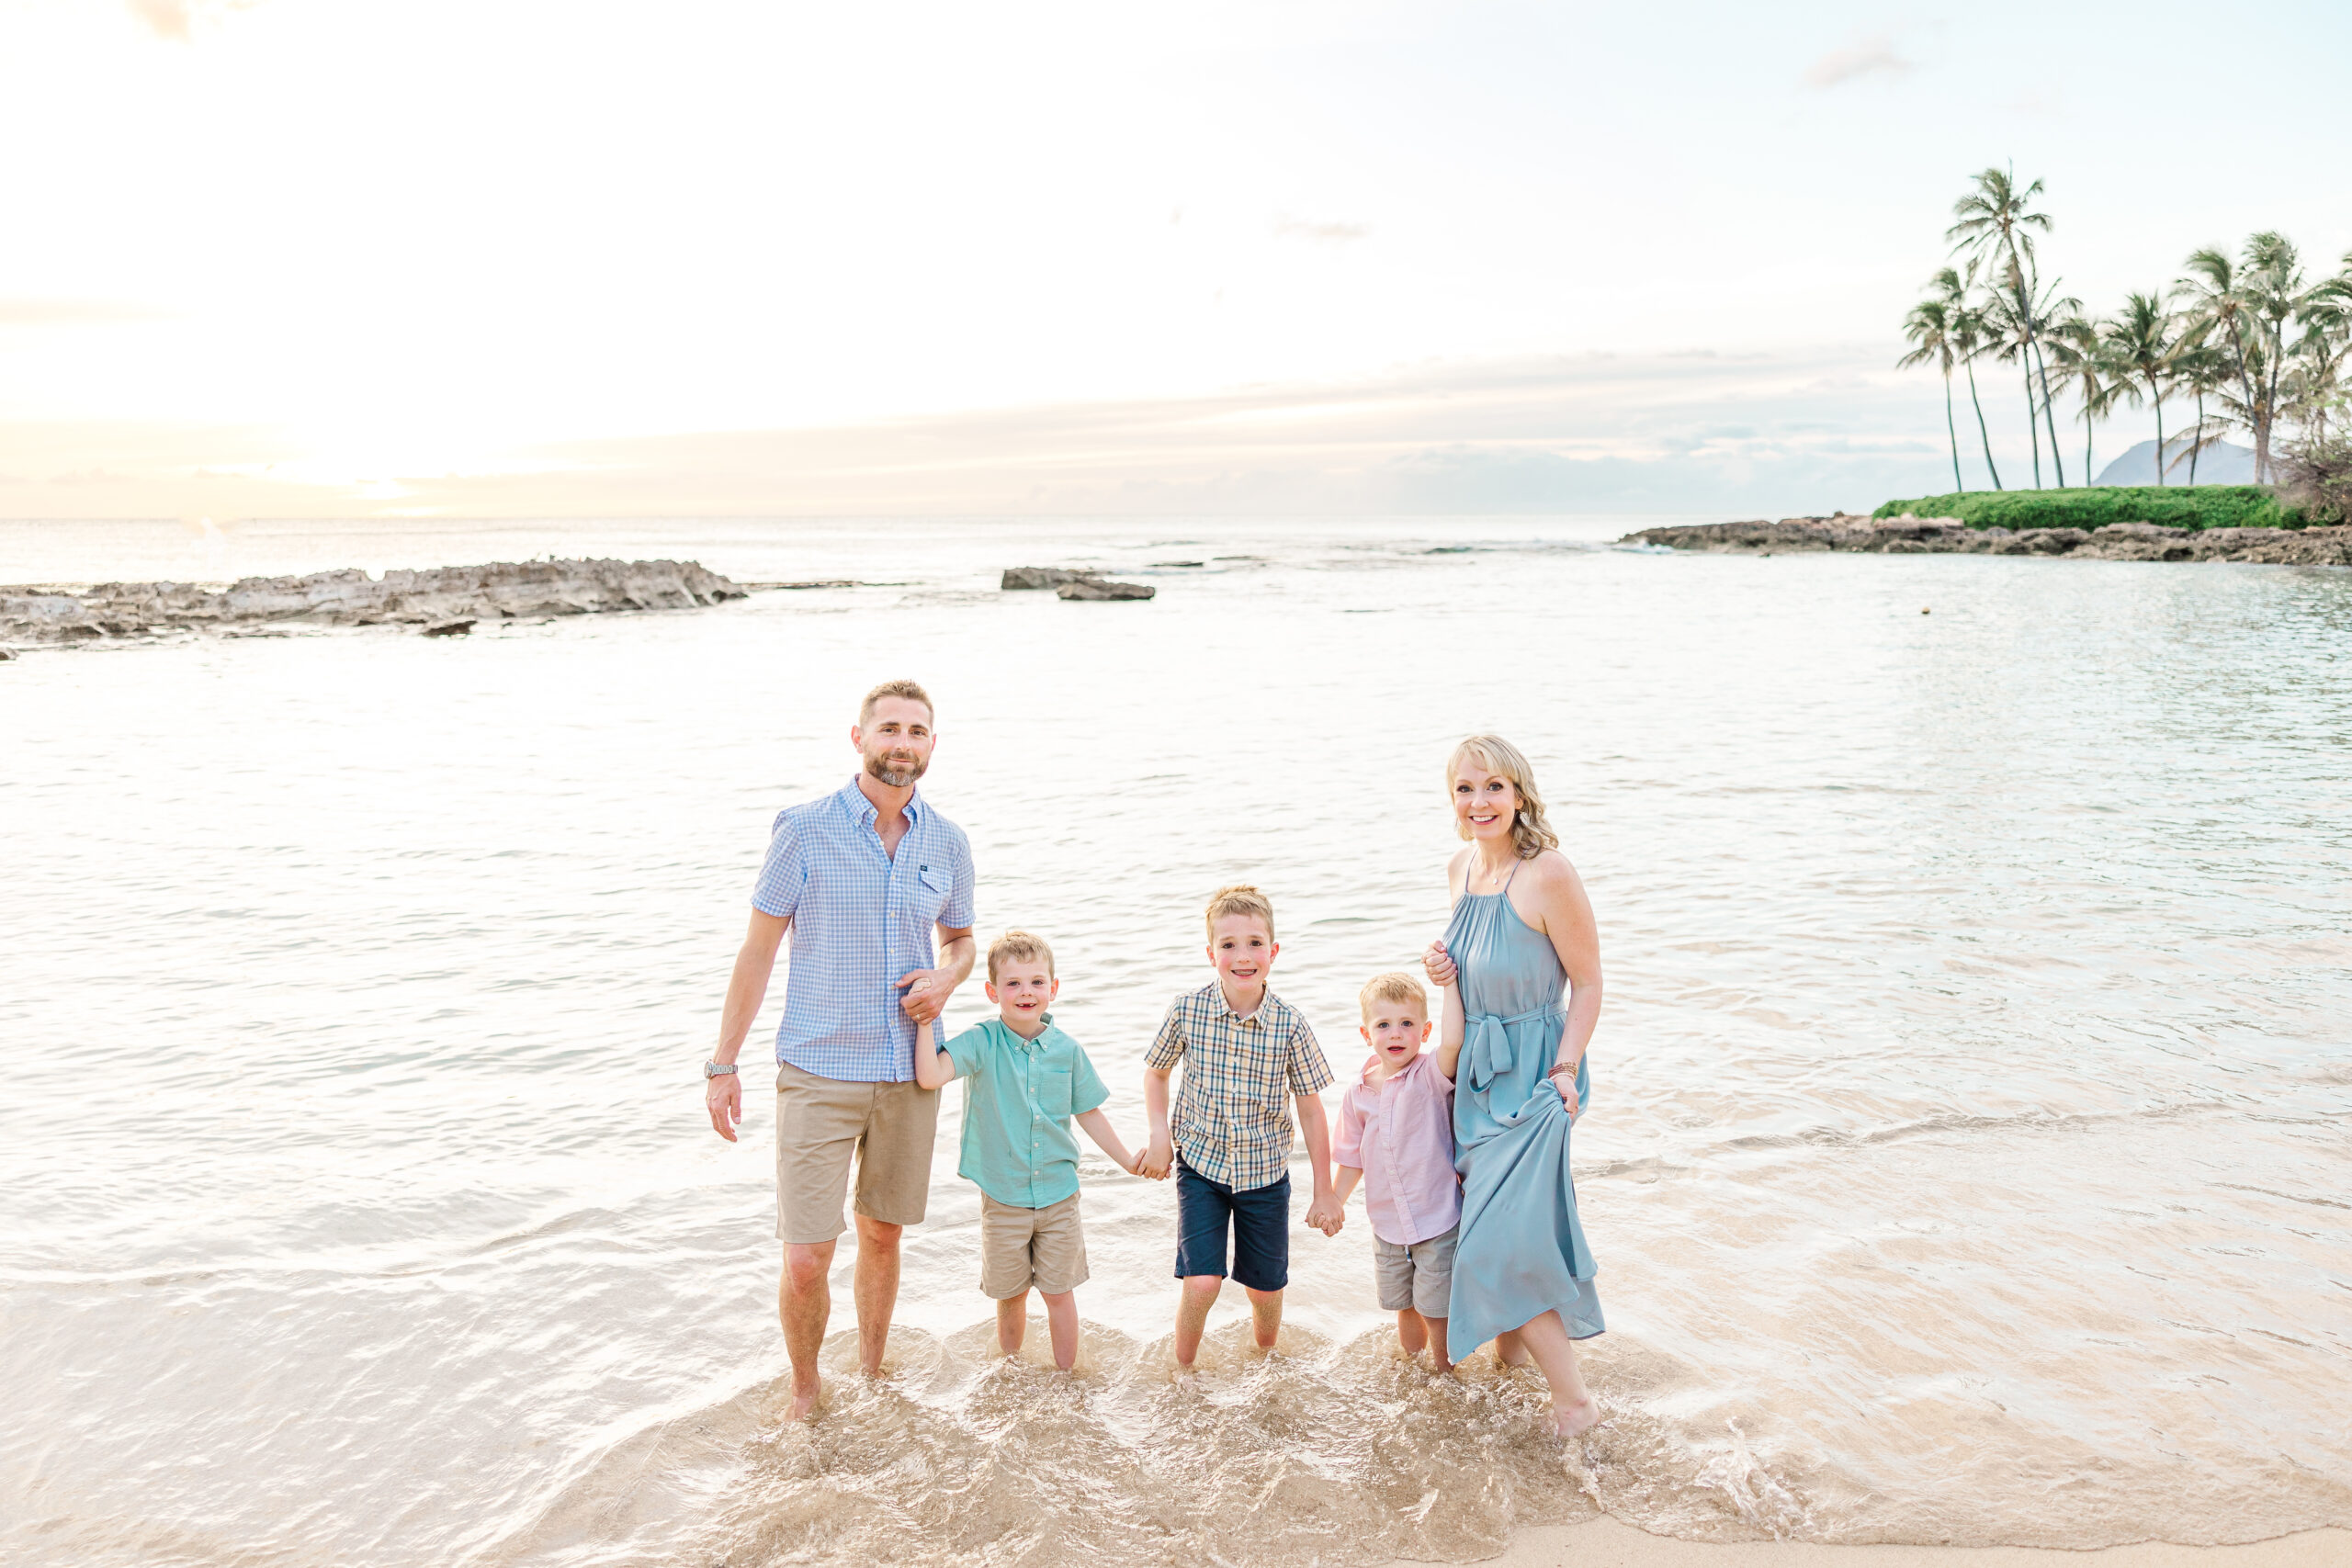 Aulani mini session for a family of 5 on the beach